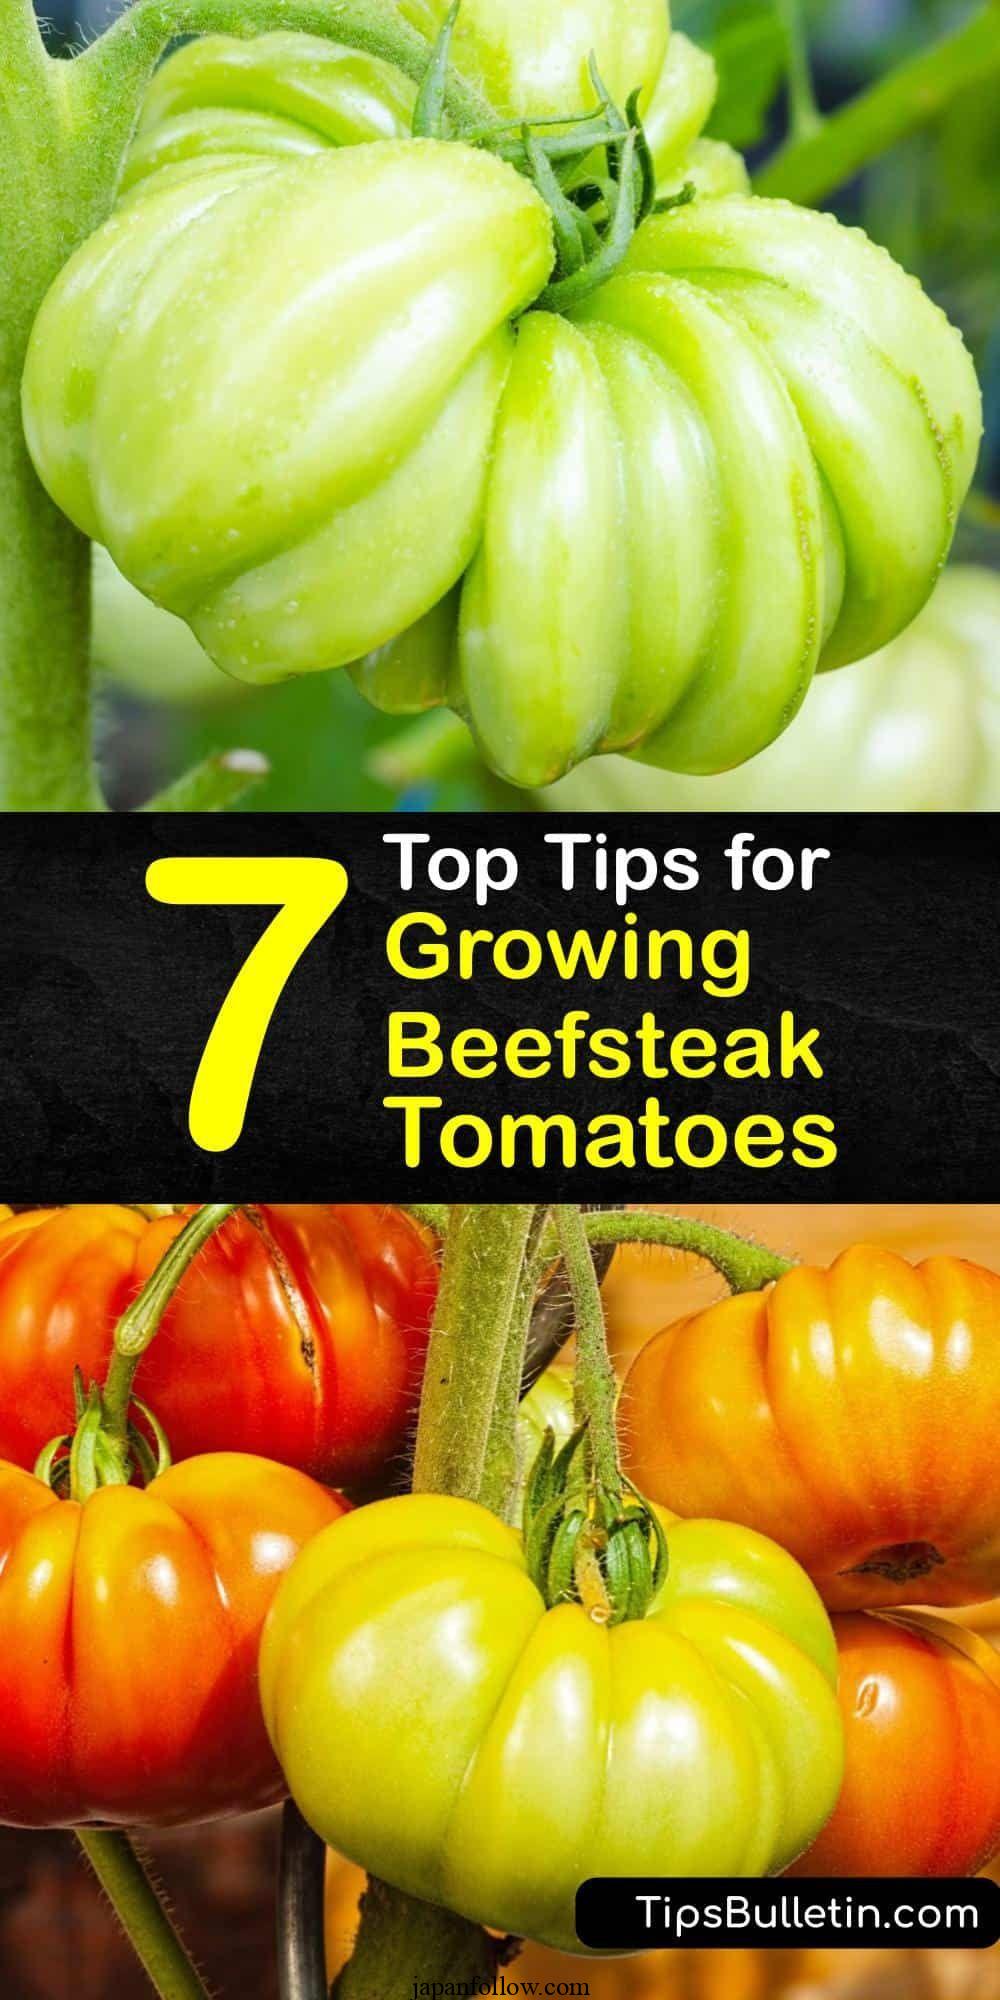 How to Plant, Grow, and Care for Beefsteak Tomatoes 2